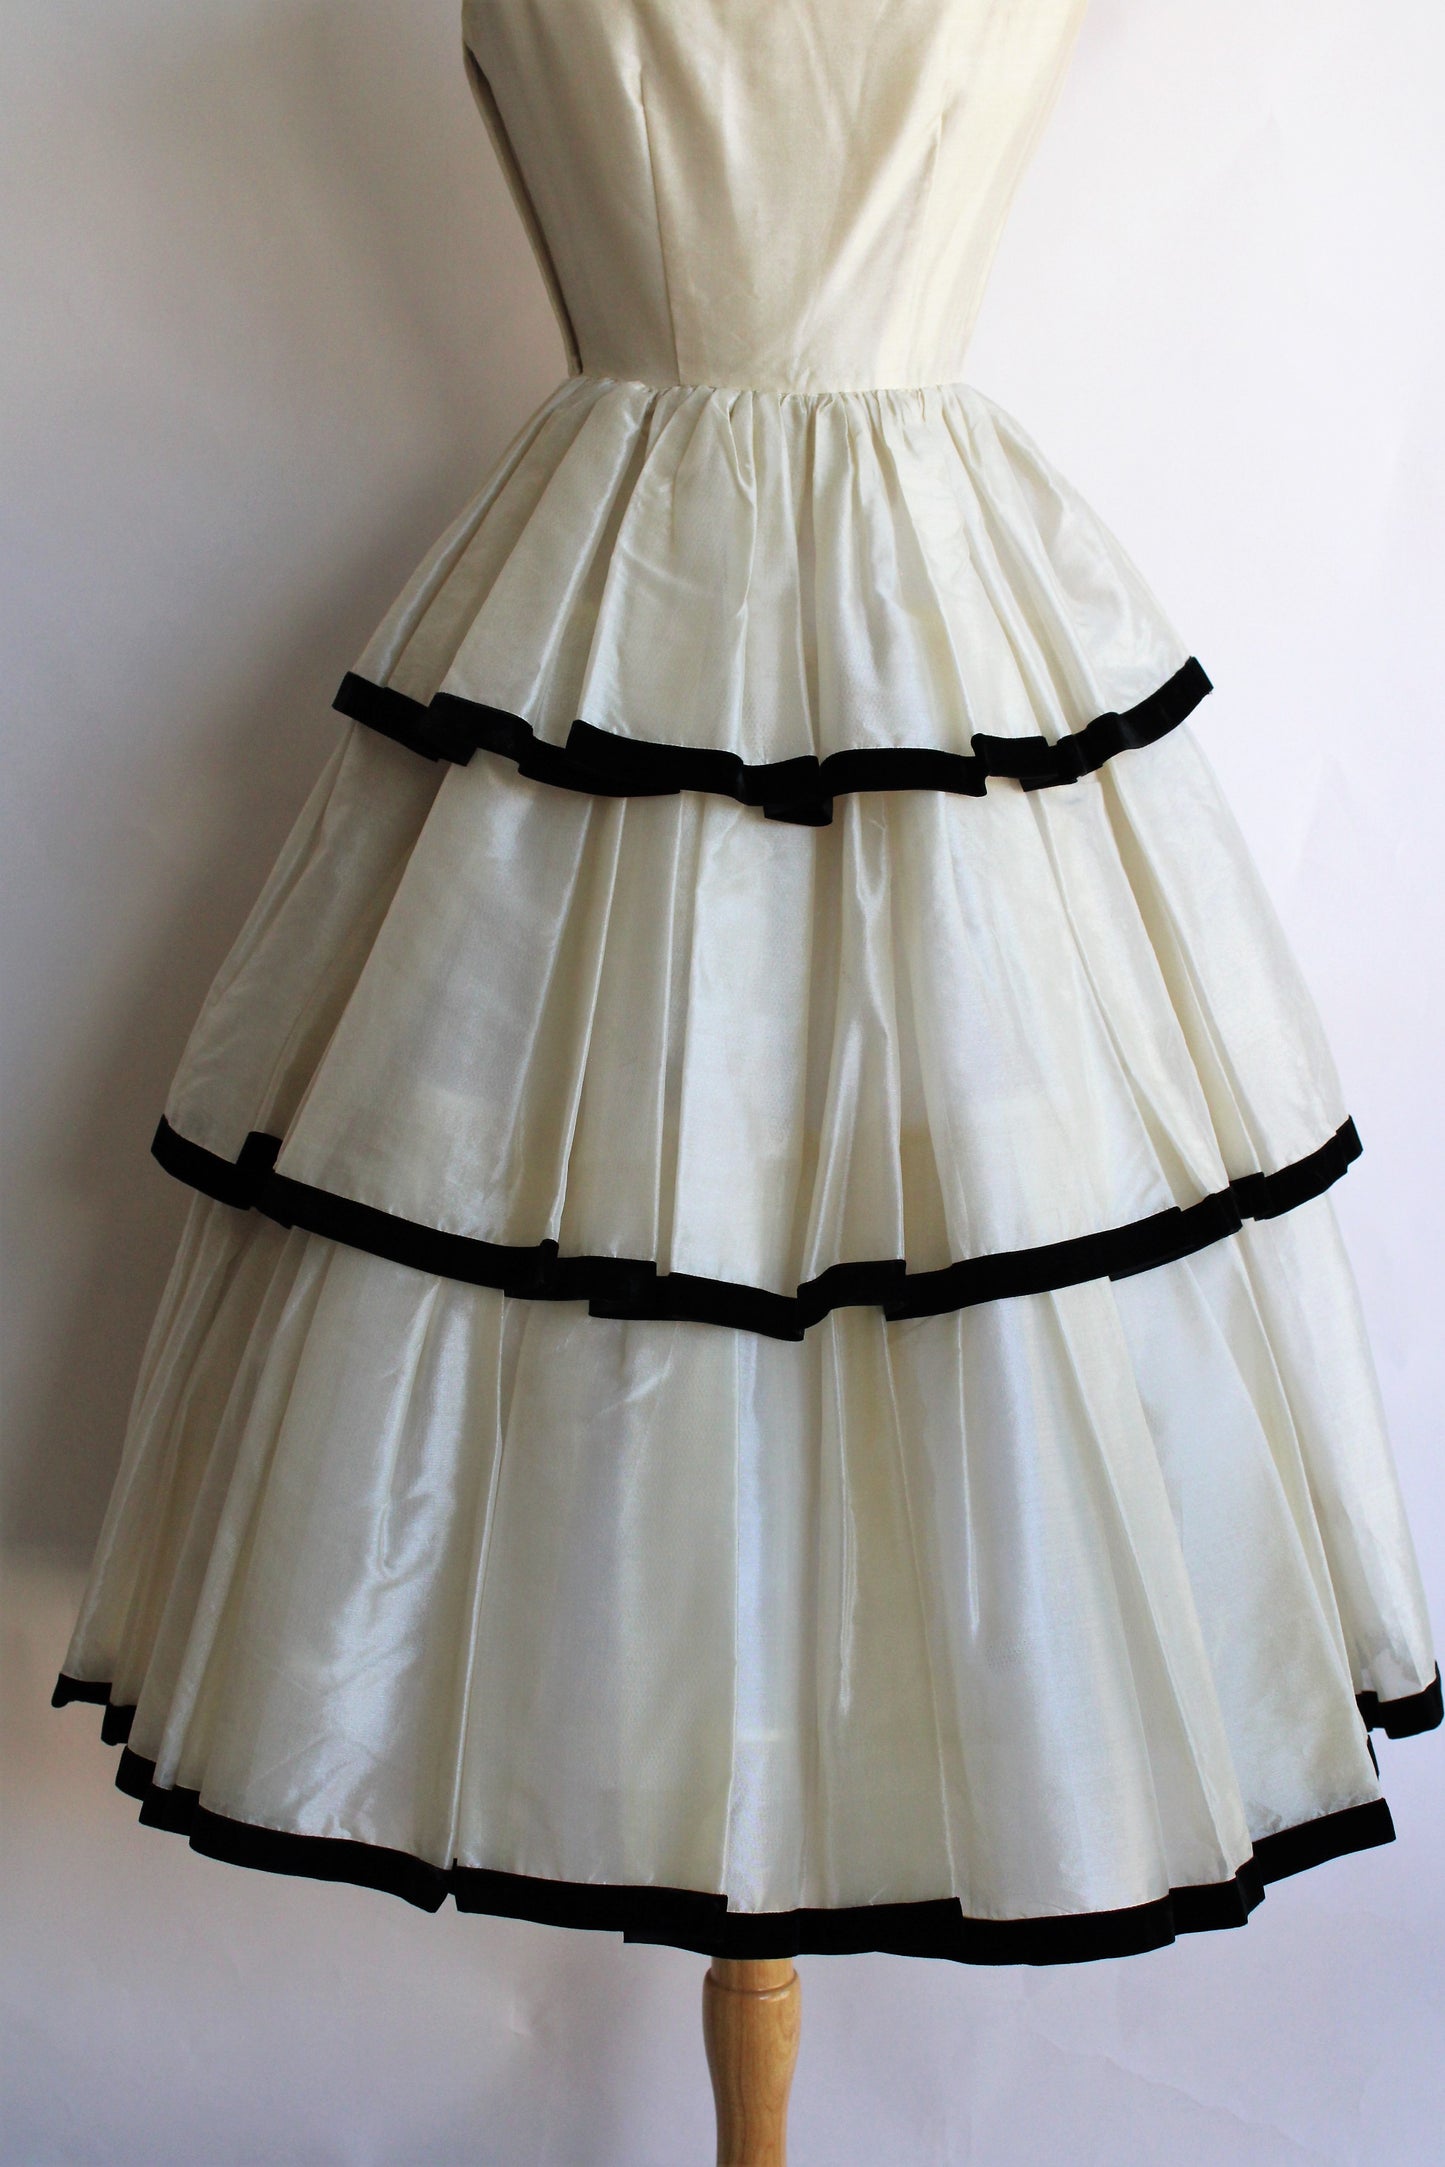 Vintage 1950s Fit and Flare Party Dress in Ivory with Black Velvet Trim